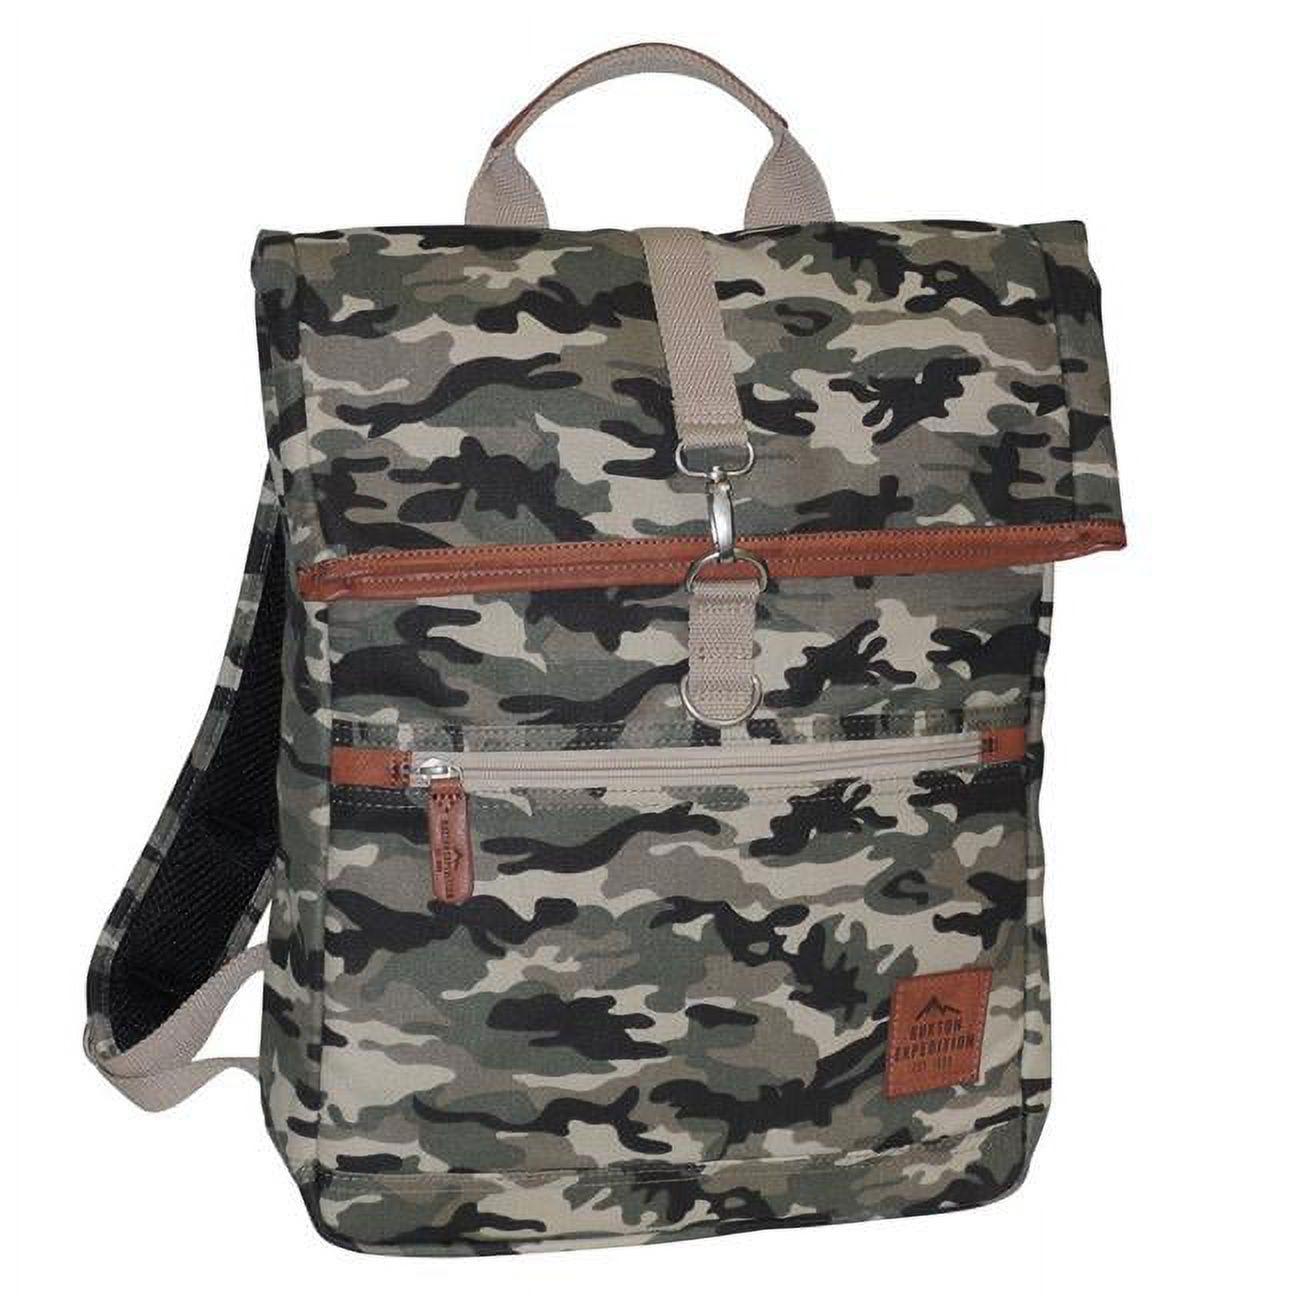 Buxton Men's Expedition II Huntington Gear Fold-Over Canvas Backpack CAMO - image 1 of 2